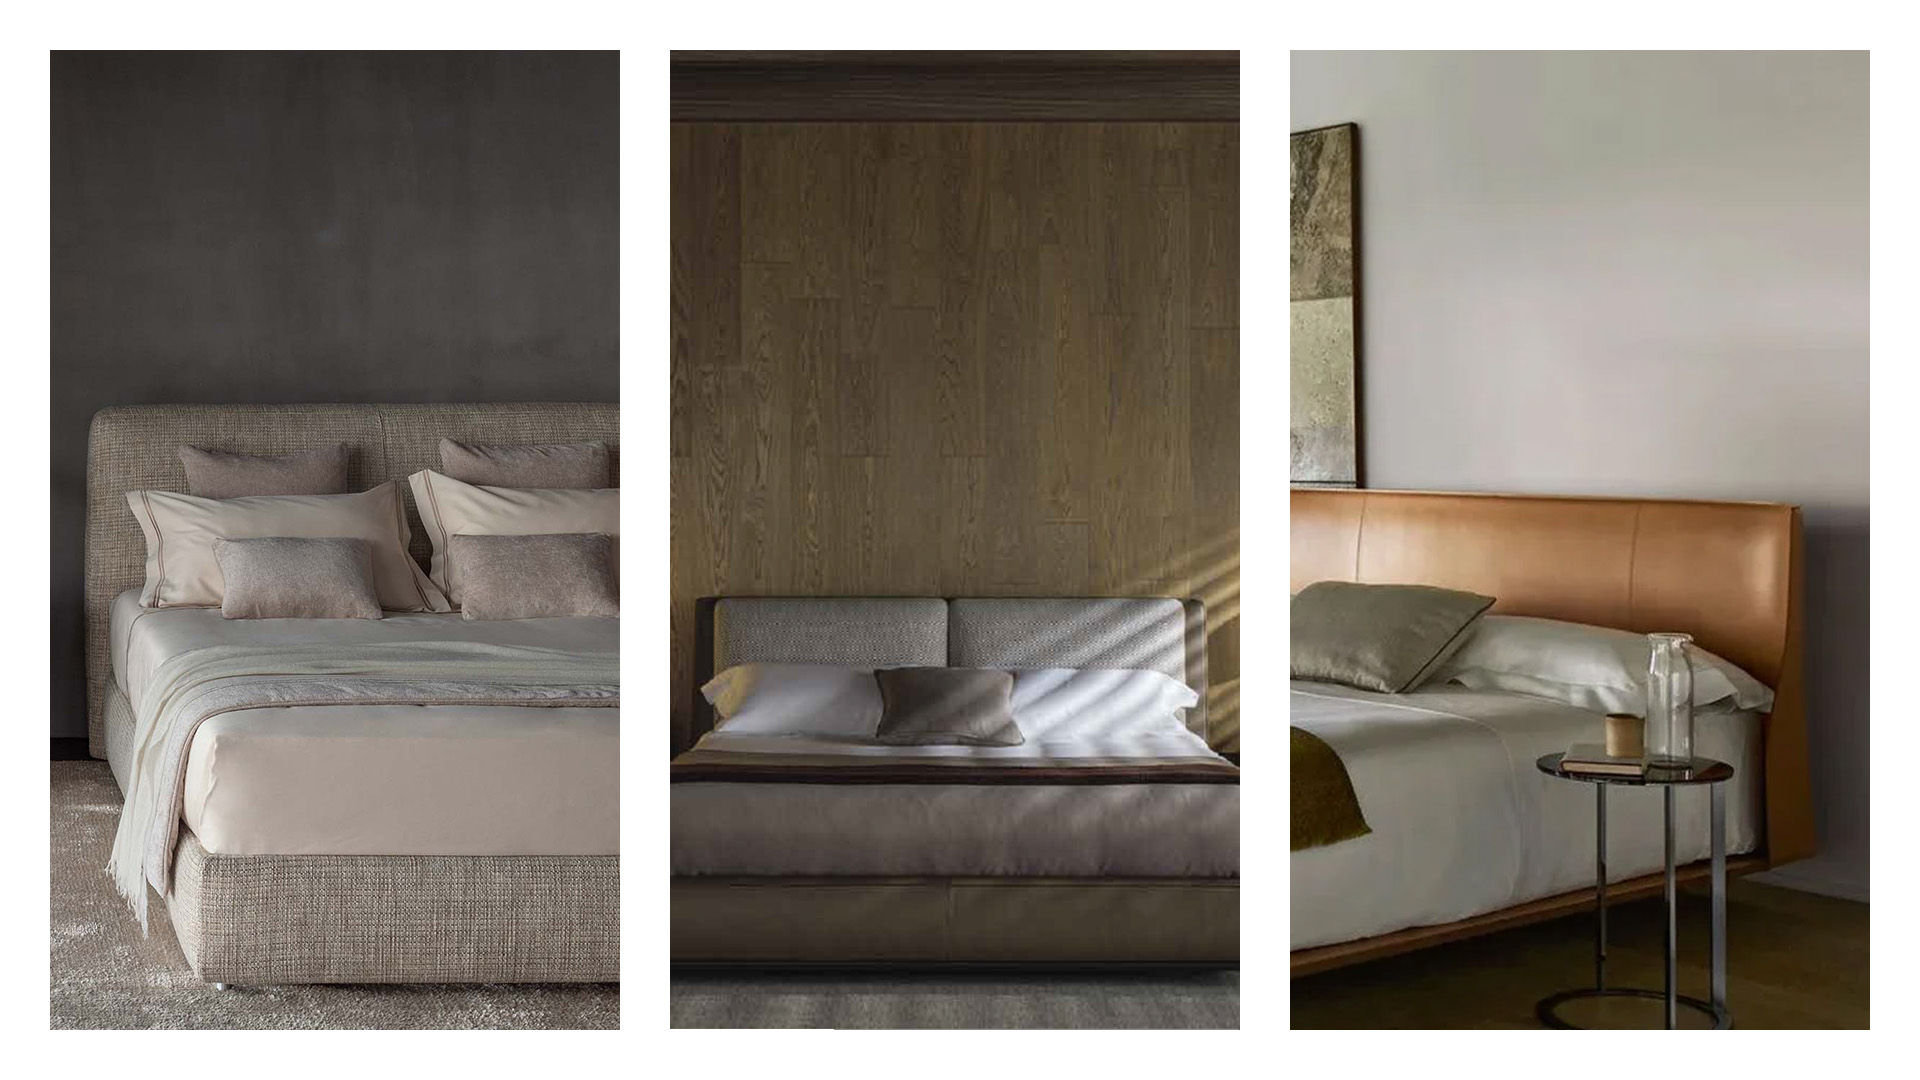 This photo shows different types of modern furniture proposed by Peverelli